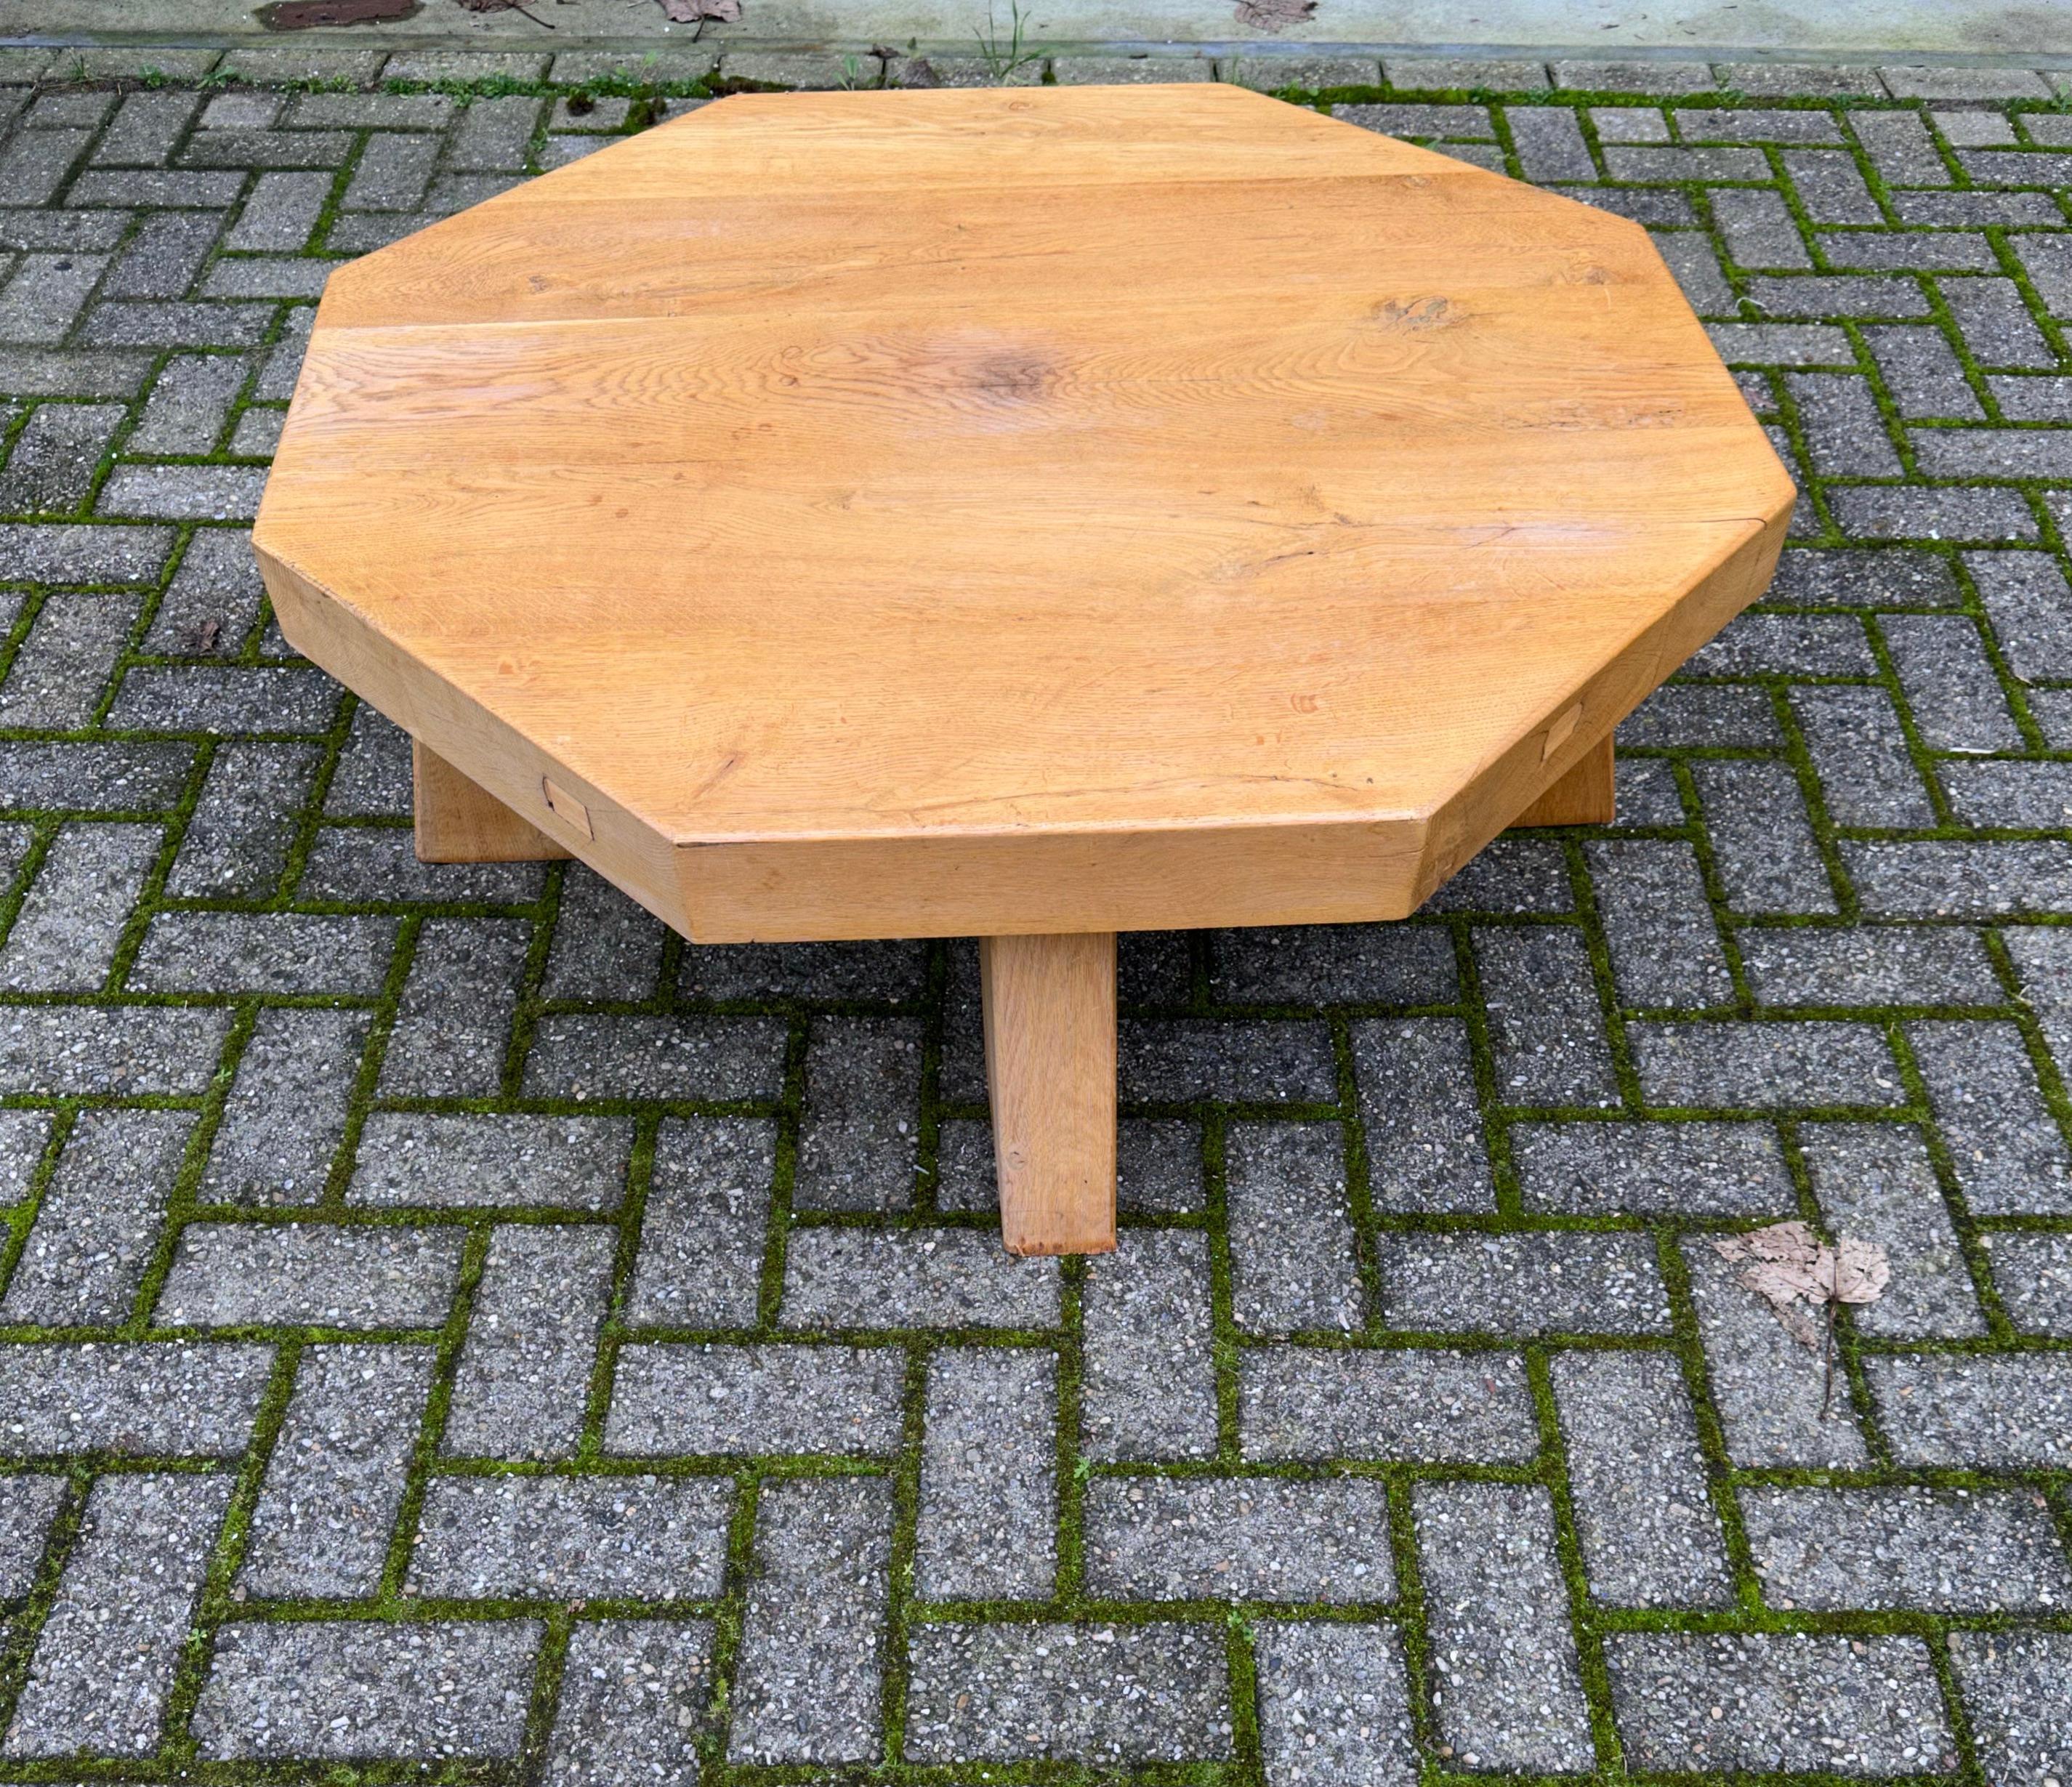 Robust and great looking, natural materials table.

This all-natural and entirely hand-crafted coffee table from circa 1960-1970 is a real eyecatcher and highly practical at the same time. Both in diameter and in height this could be THE perfect